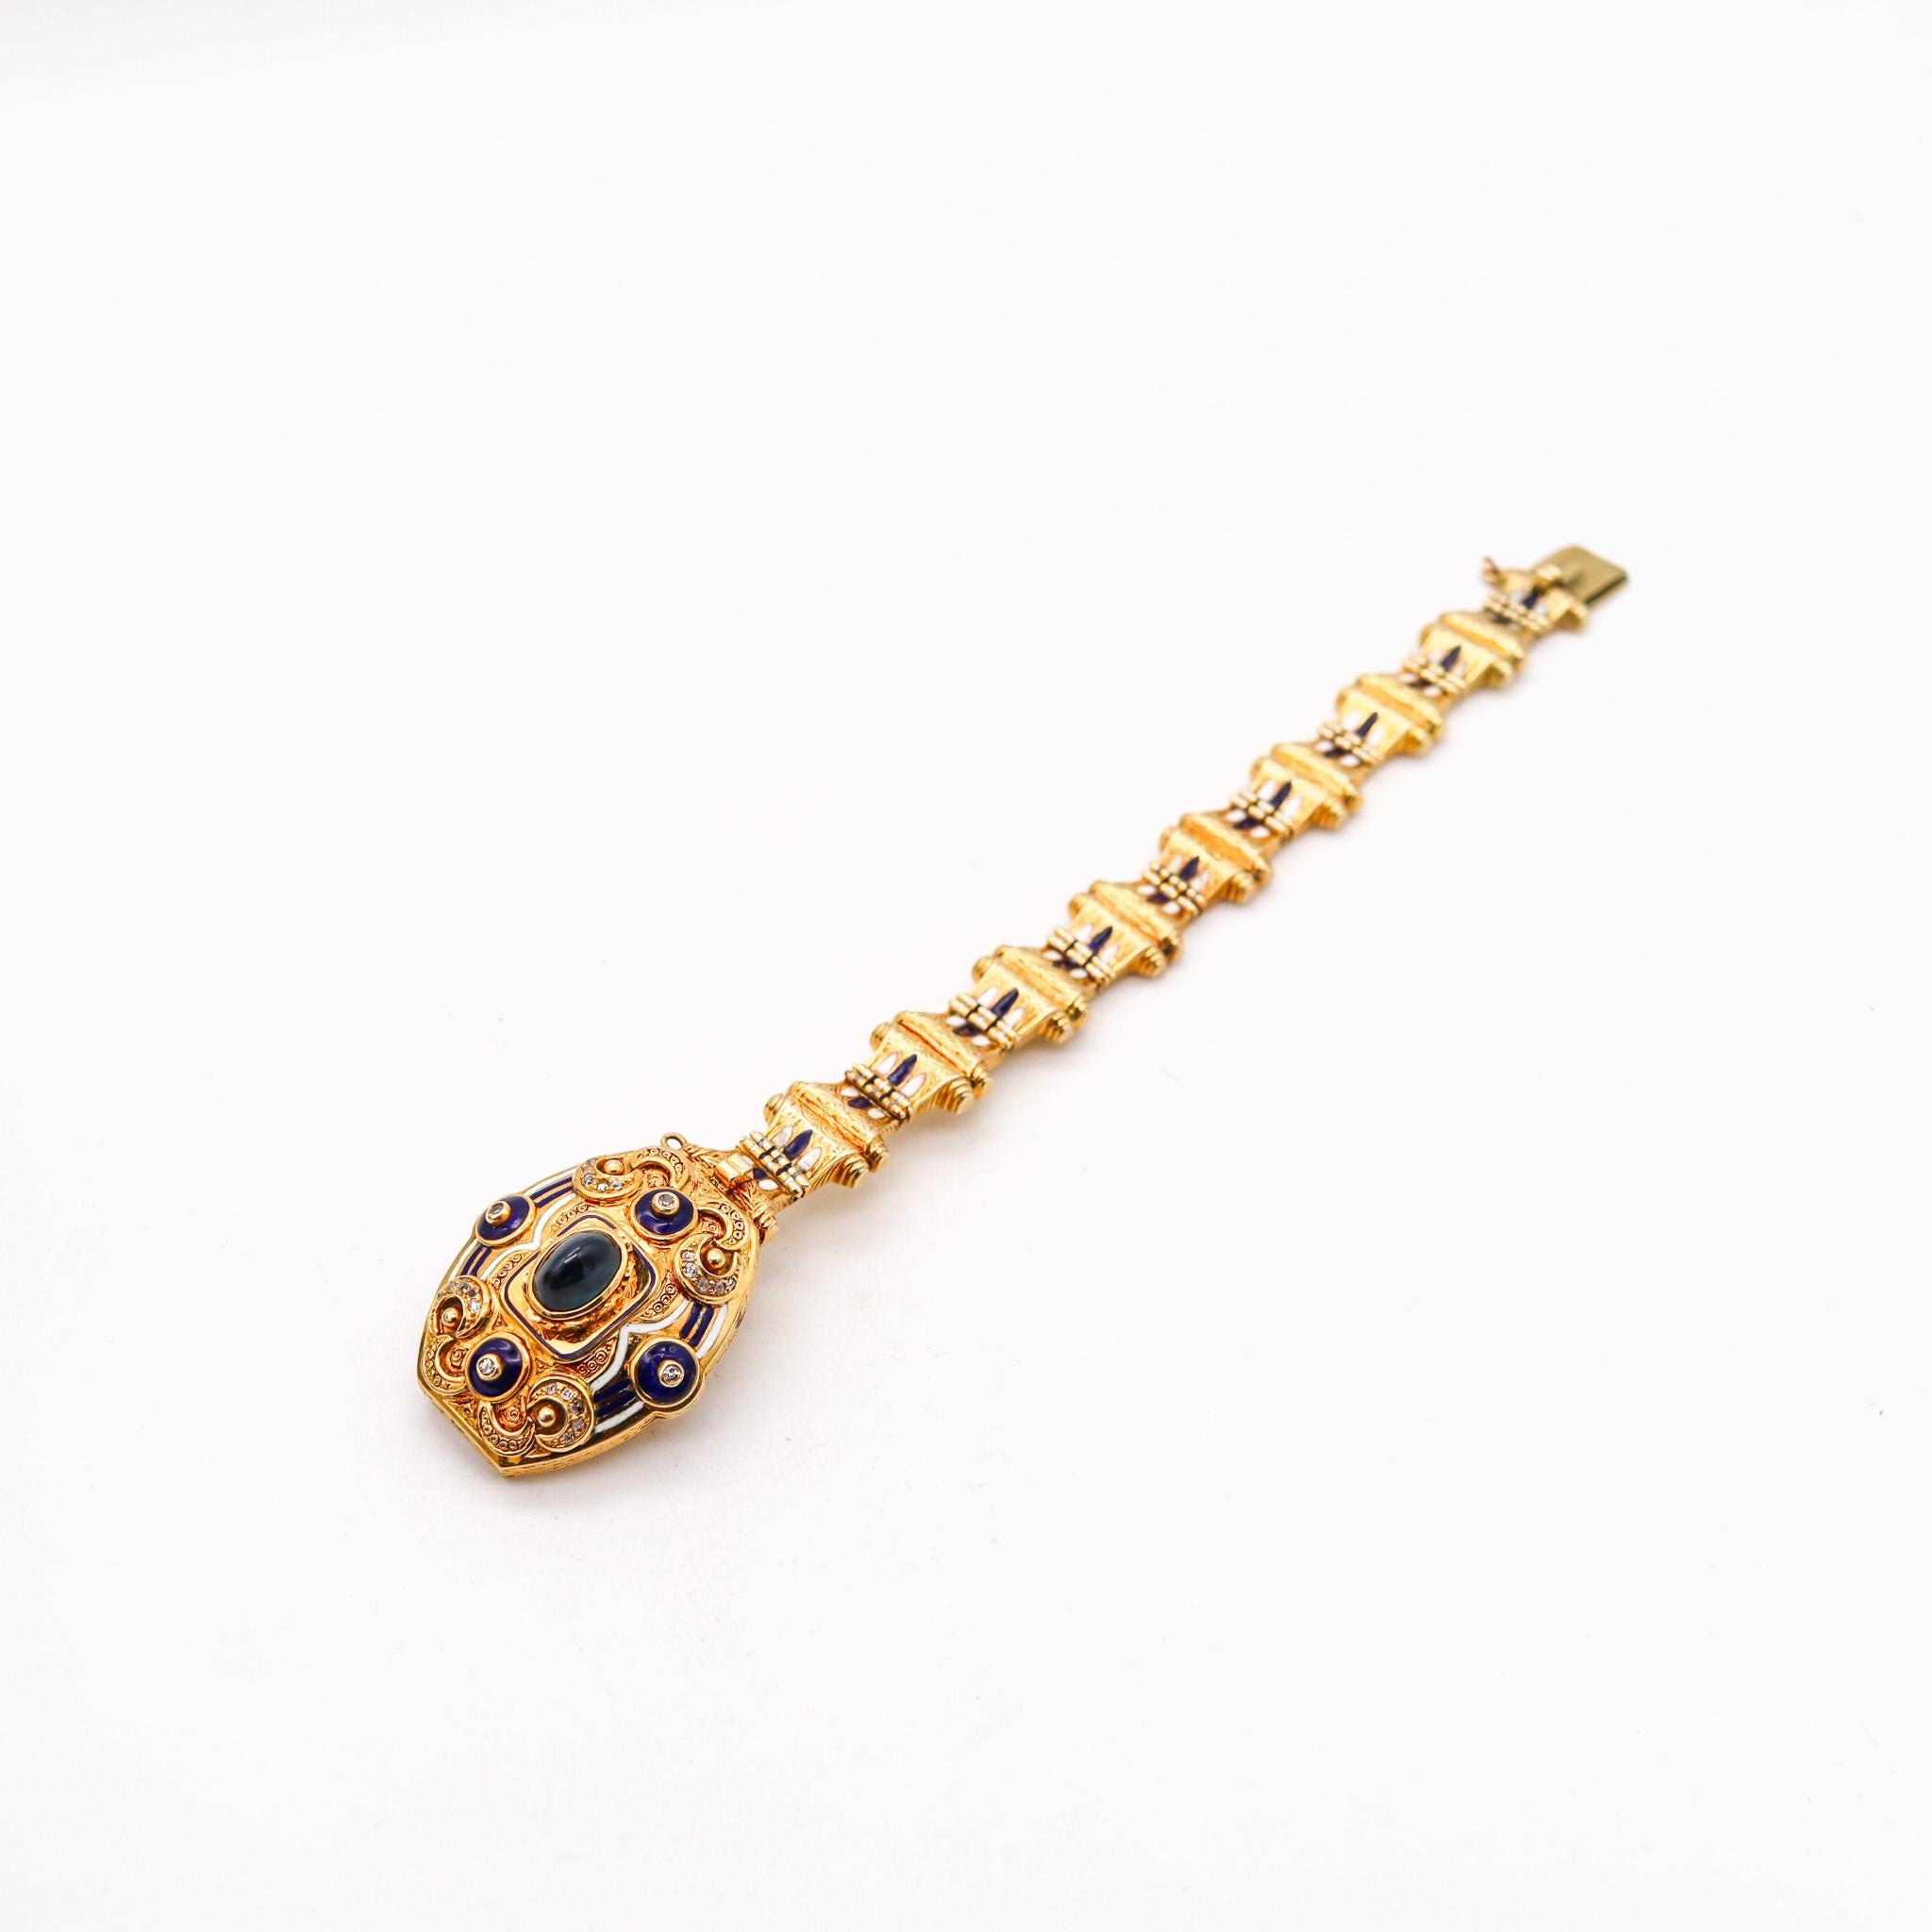 Edwardian 1900 Enameled Bracelet In 18Kt Yellow Gold With Sapphires And Diamonds For Sale 1